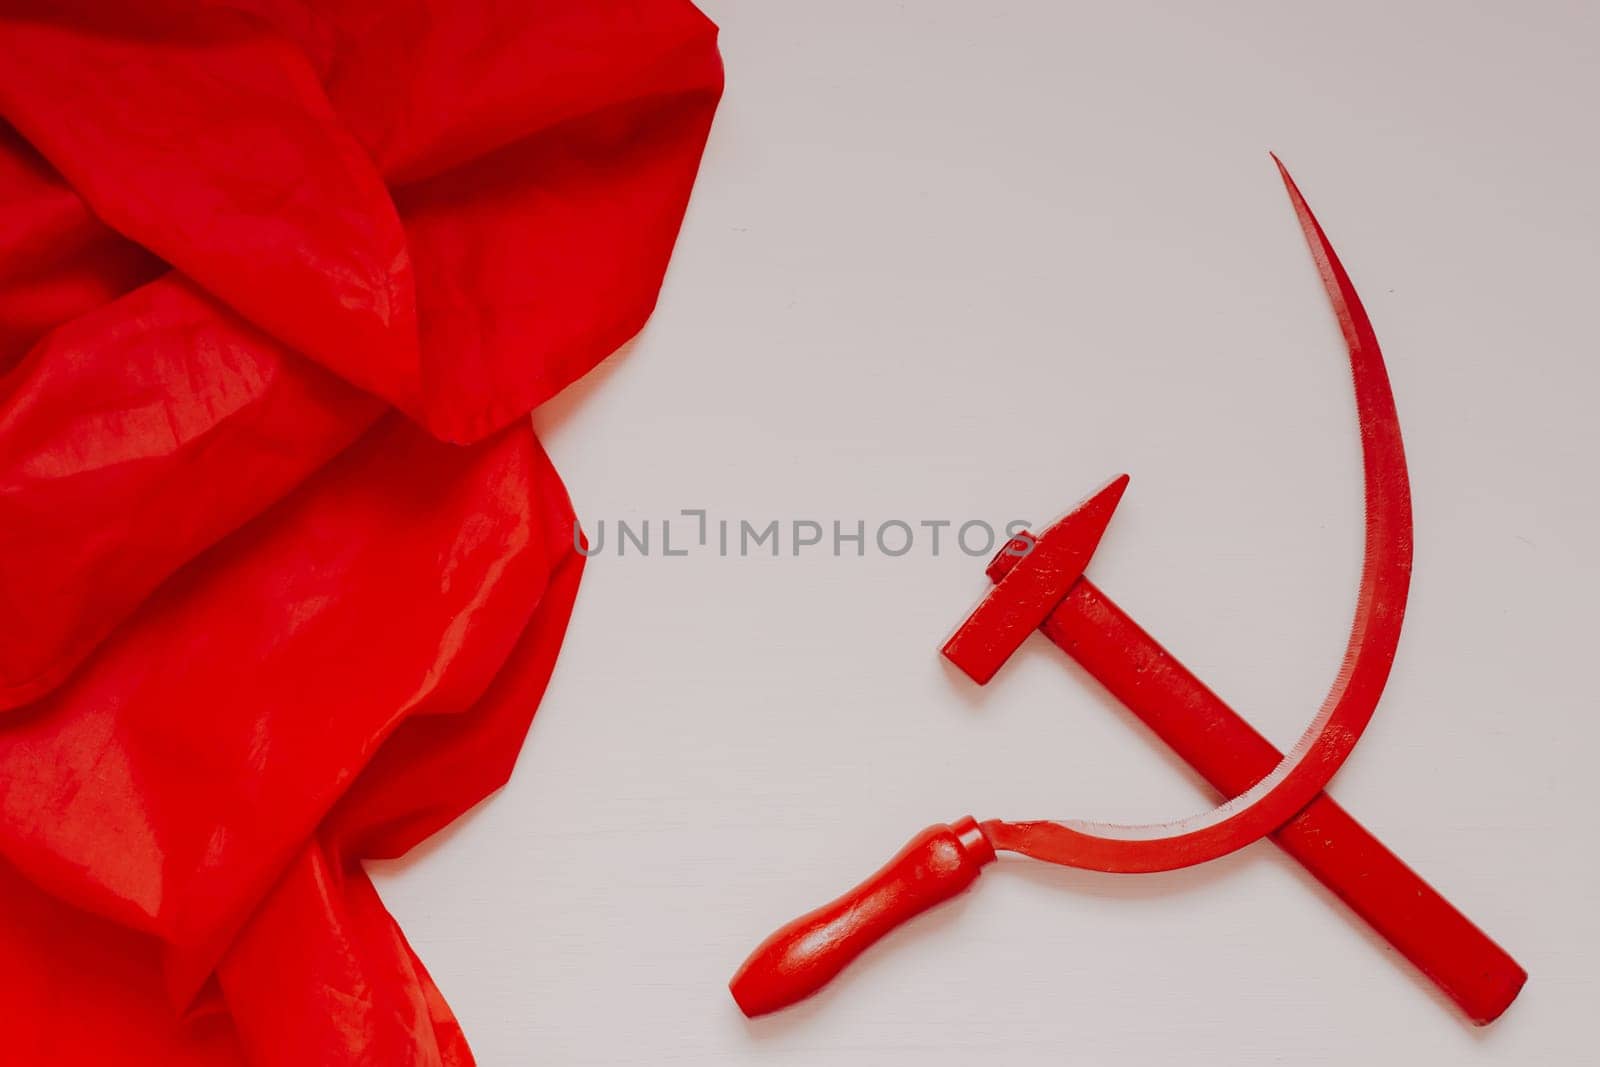 red sickle and hammer symbol of Soviet Union commonism history of Russia by Simakov